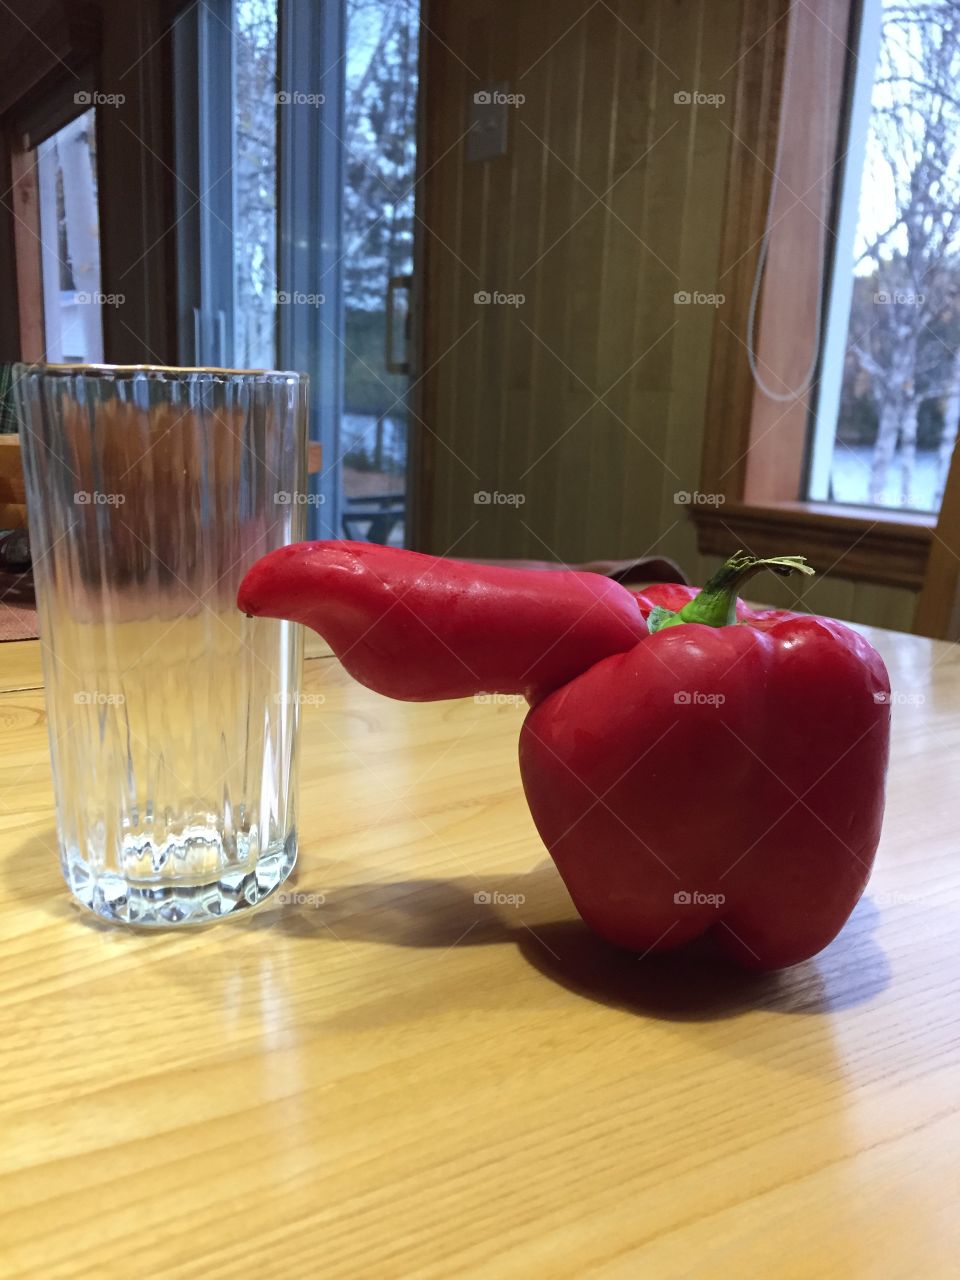 Penis red sweet pepper on a table with a glass